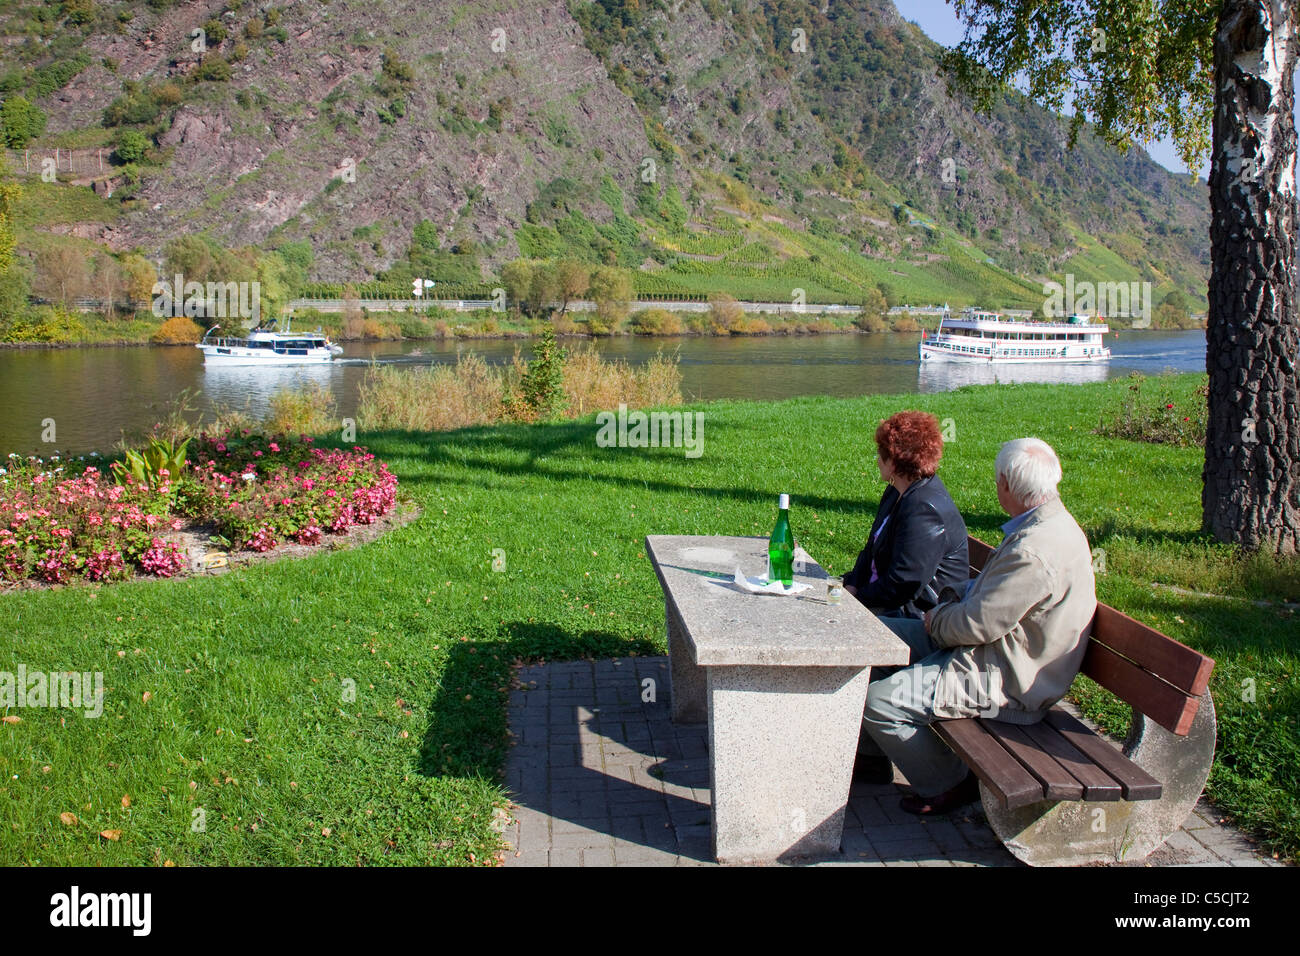 Senioren betrachten Boote auf der Mosel bei Cochem, Herbst, Mittelmosel, old people watching boats on the Moselle river, autumn Stock Photo